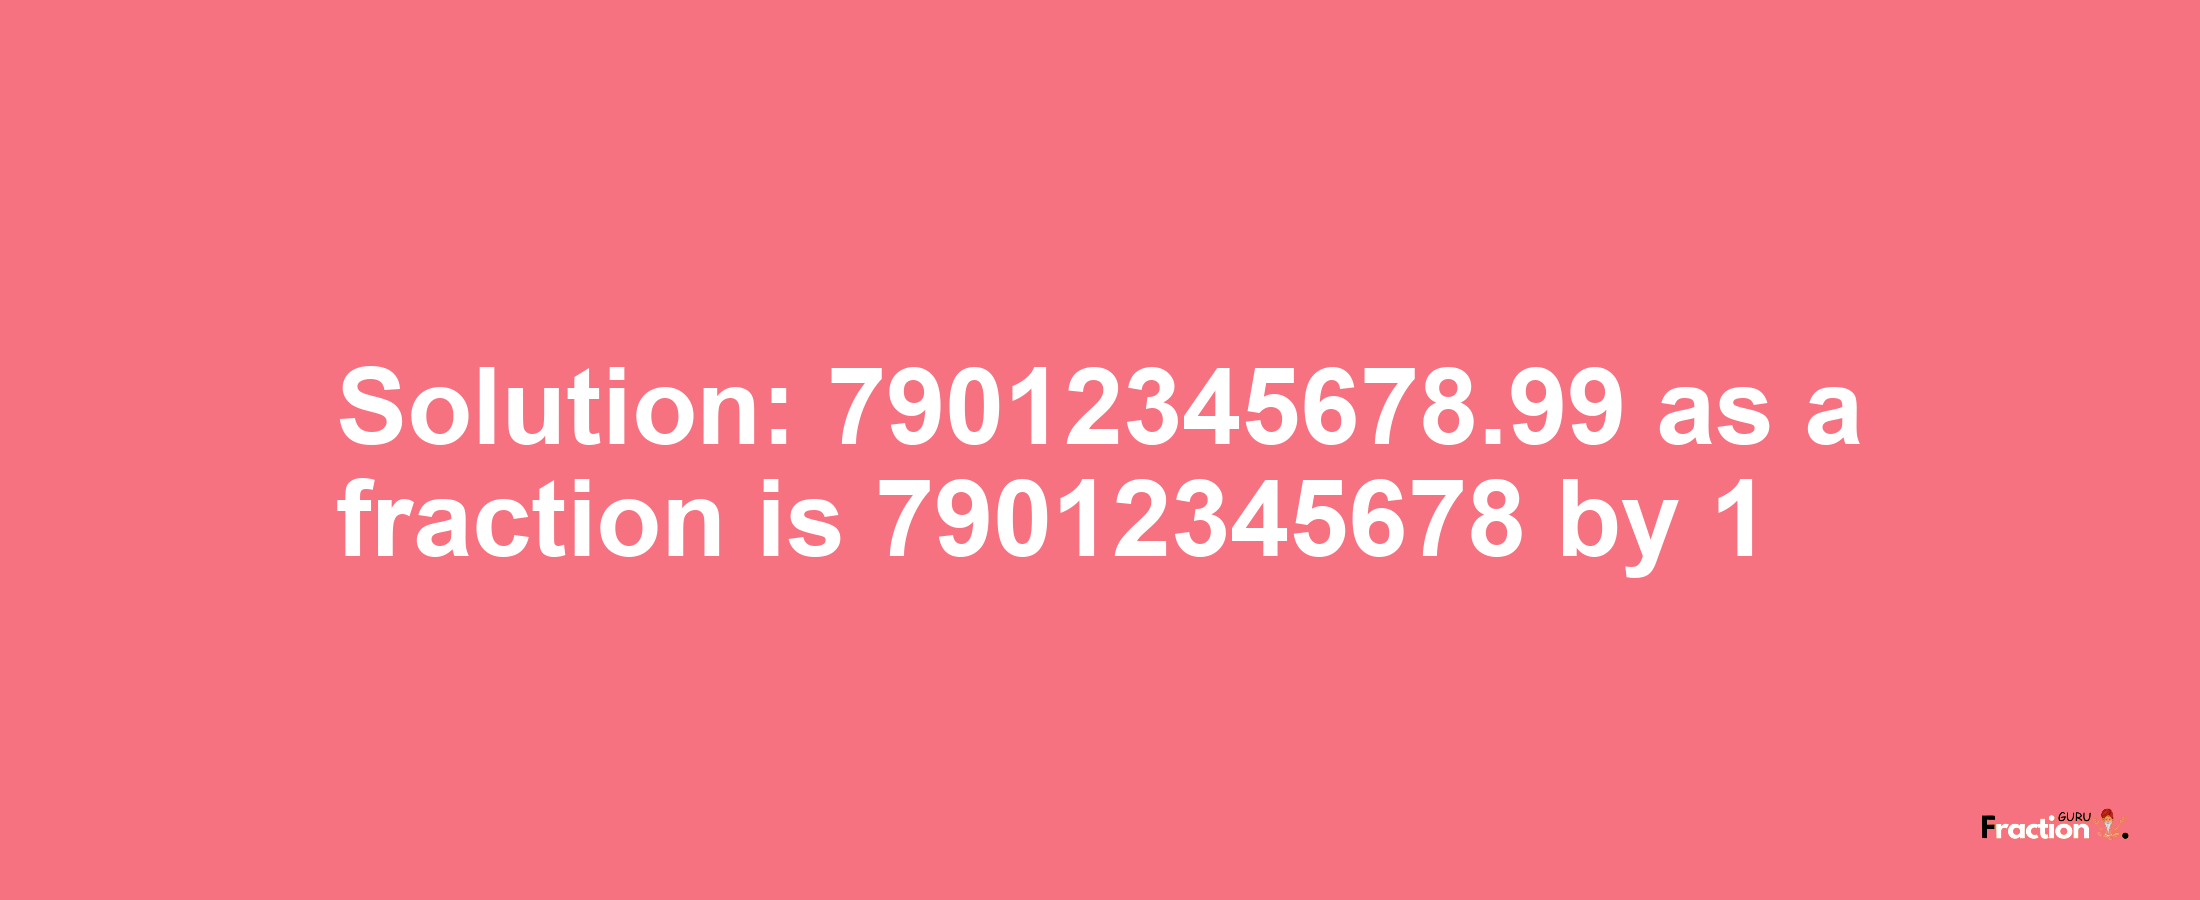 Solution:79012345678.99 as a fraction is 79012345678/1